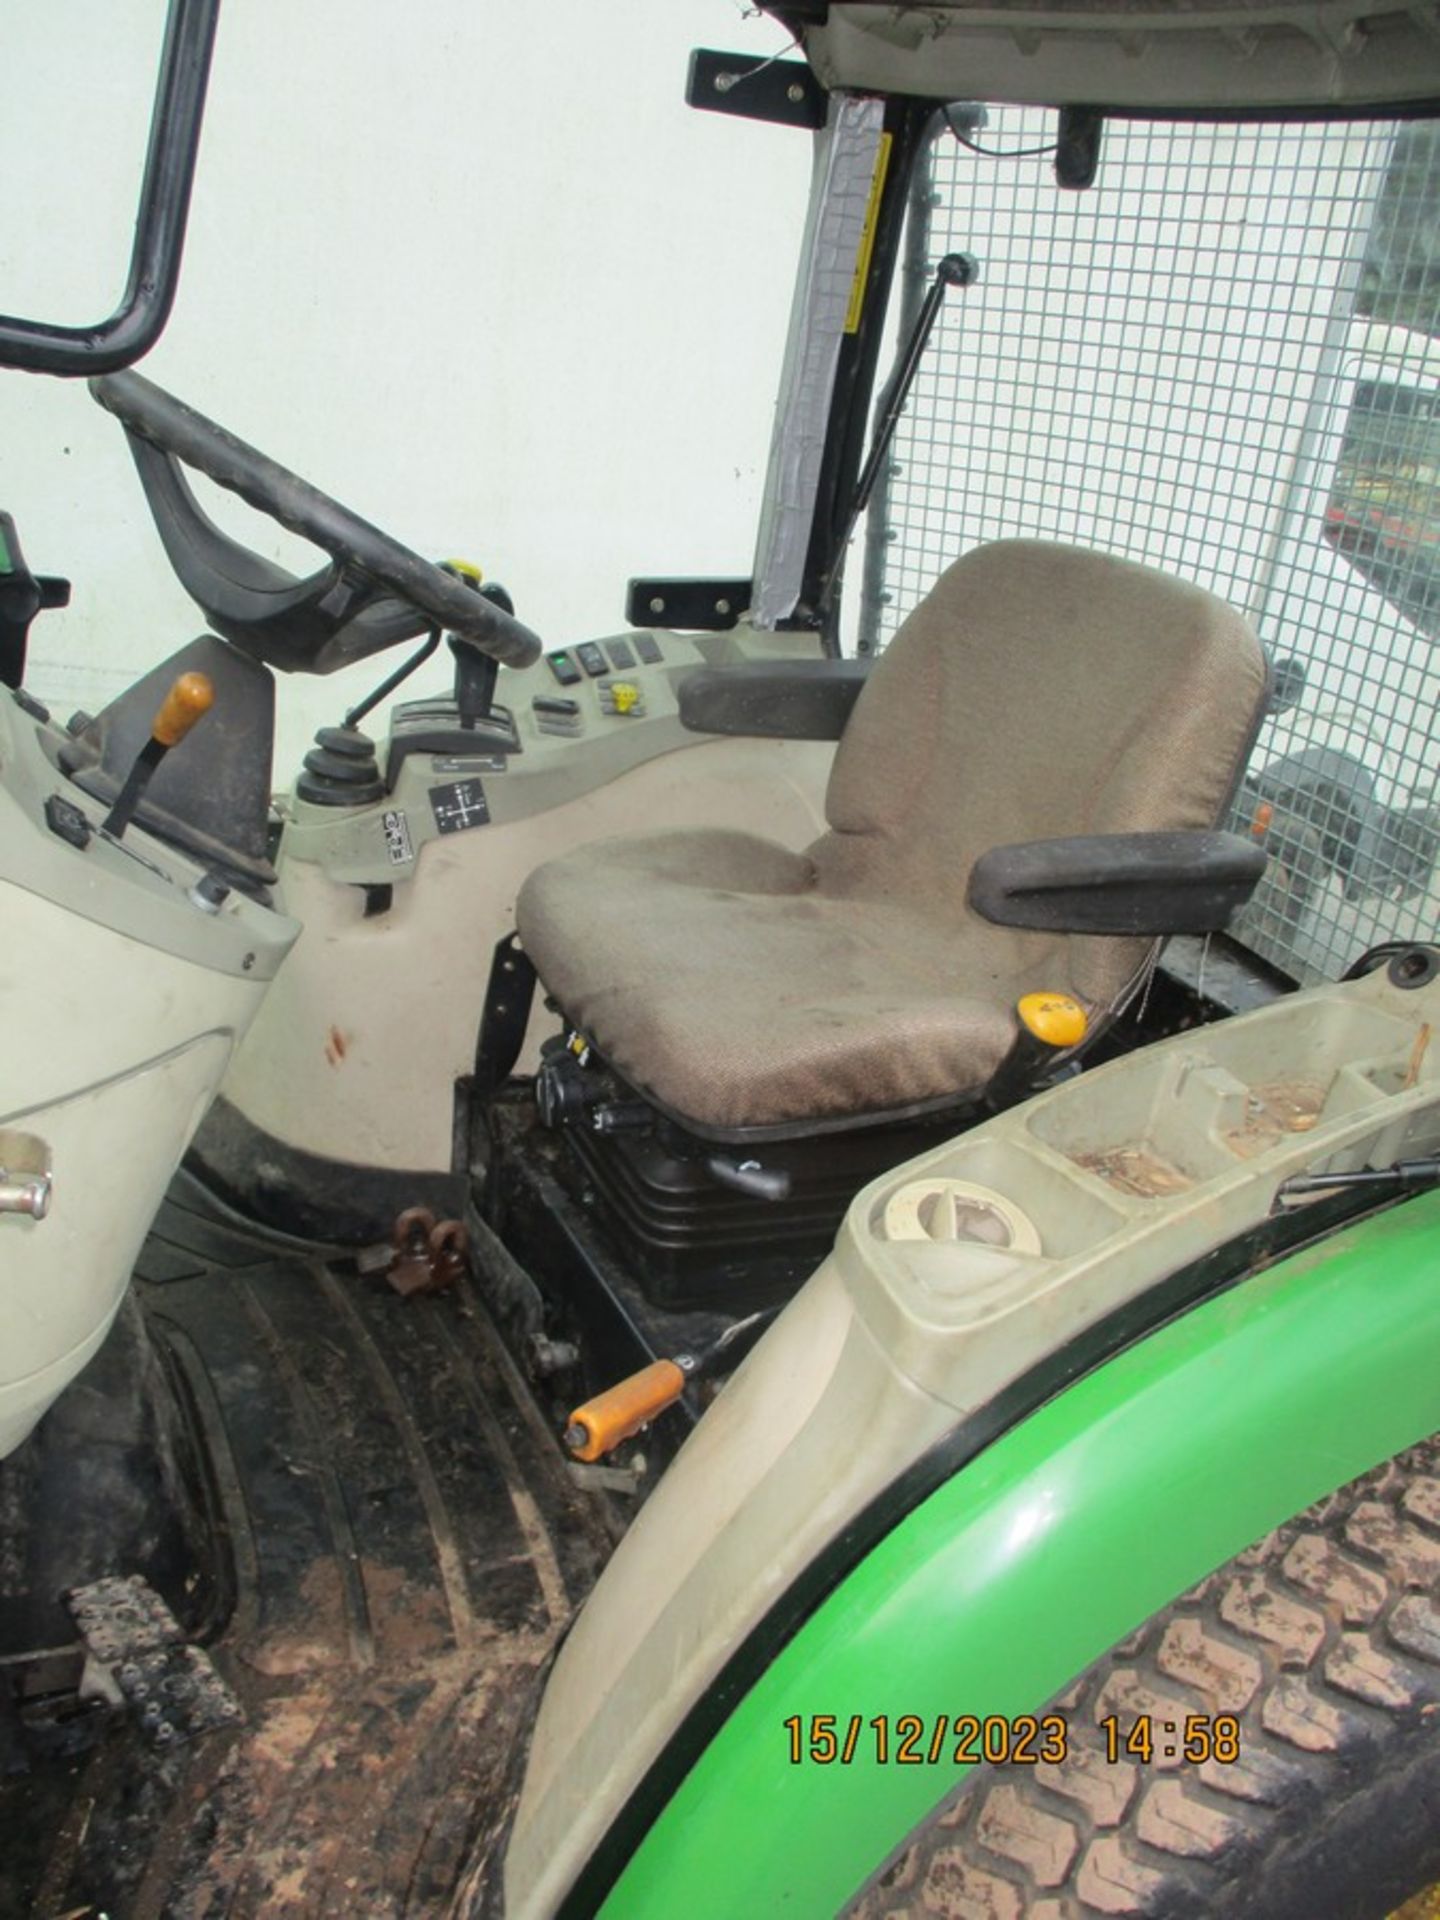 JOHN DEERE 3520 TRACTOR 2009 SHOWS 2250HRS C.W V5 SHOWING 1 COUNCIL OWNER FROM NEW NON RUNNER - Image 2 of 6